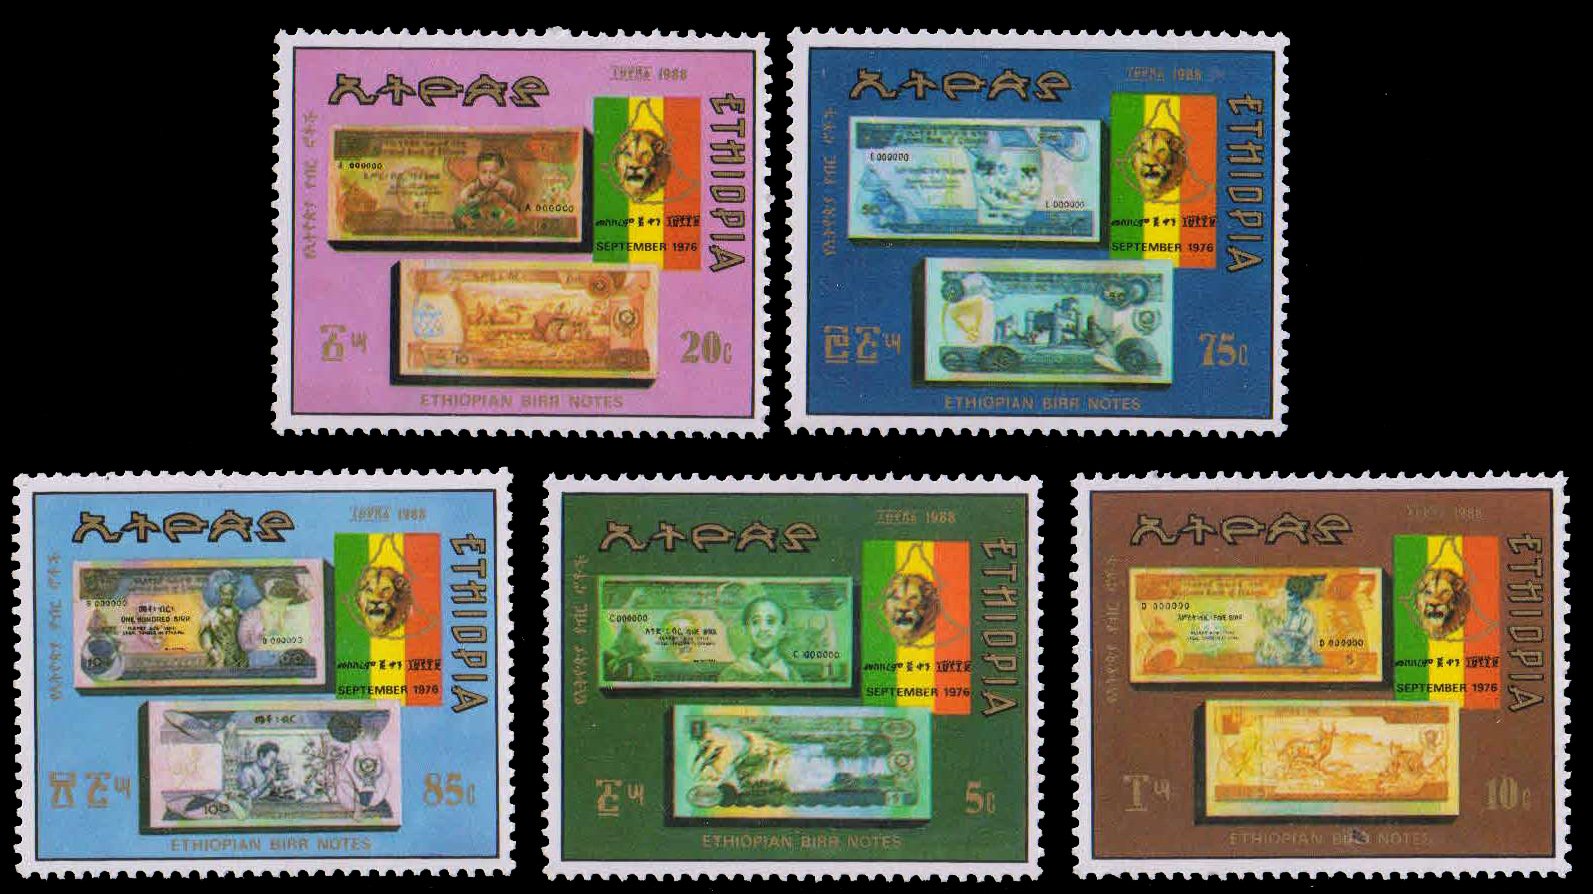 ETHIOPIA 1988-Bank Notes, Currency on Stamps-Set of 5, MNH, Cat £ 12-S.G. 1420-1424